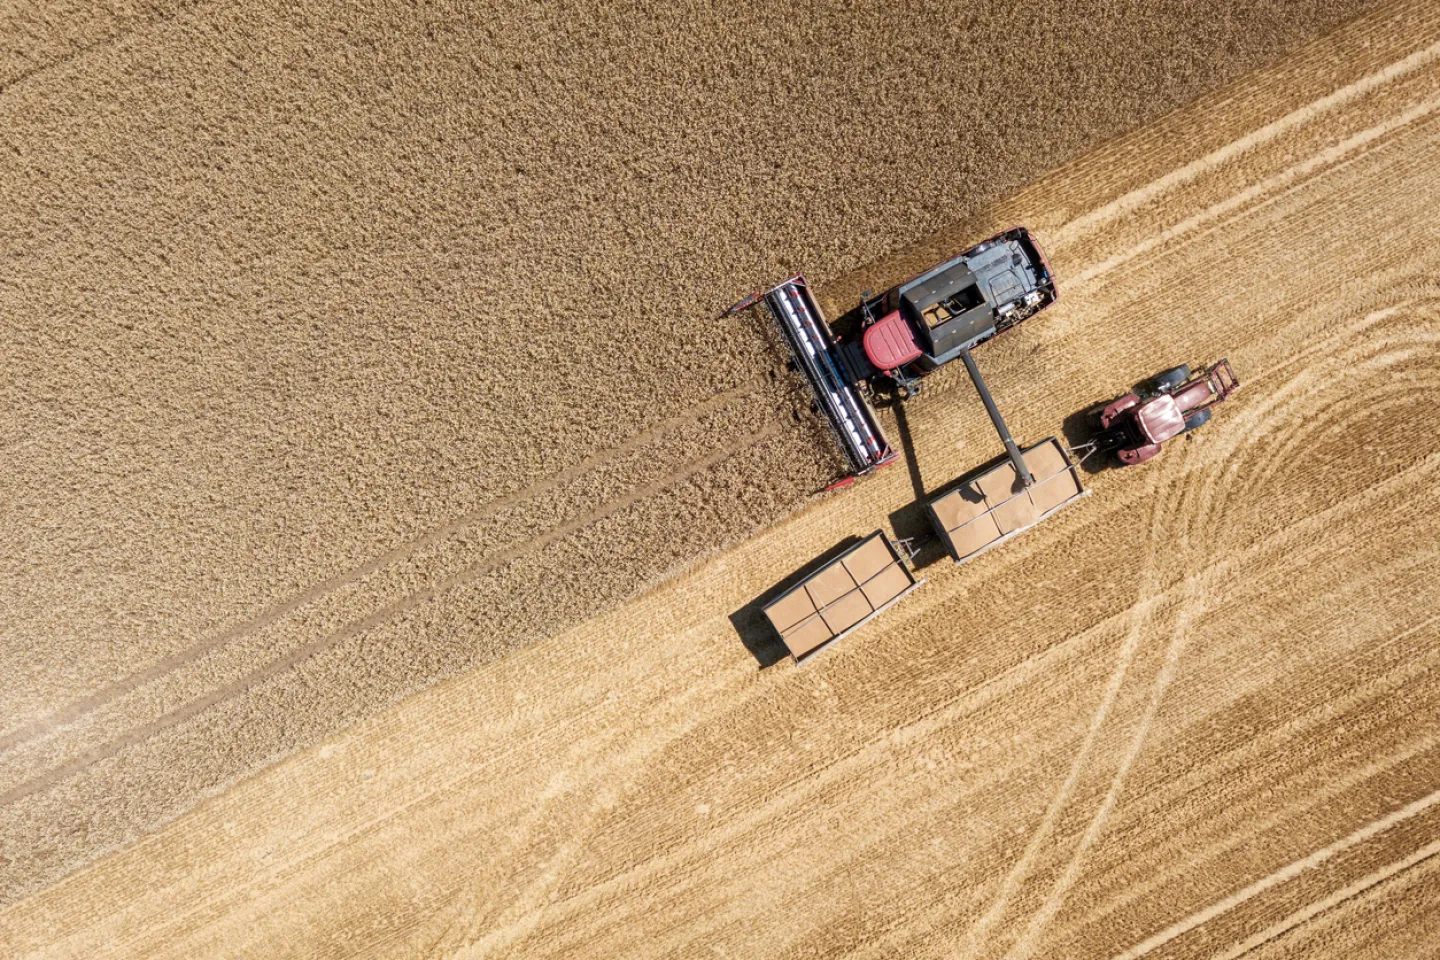 Wheat being harvested